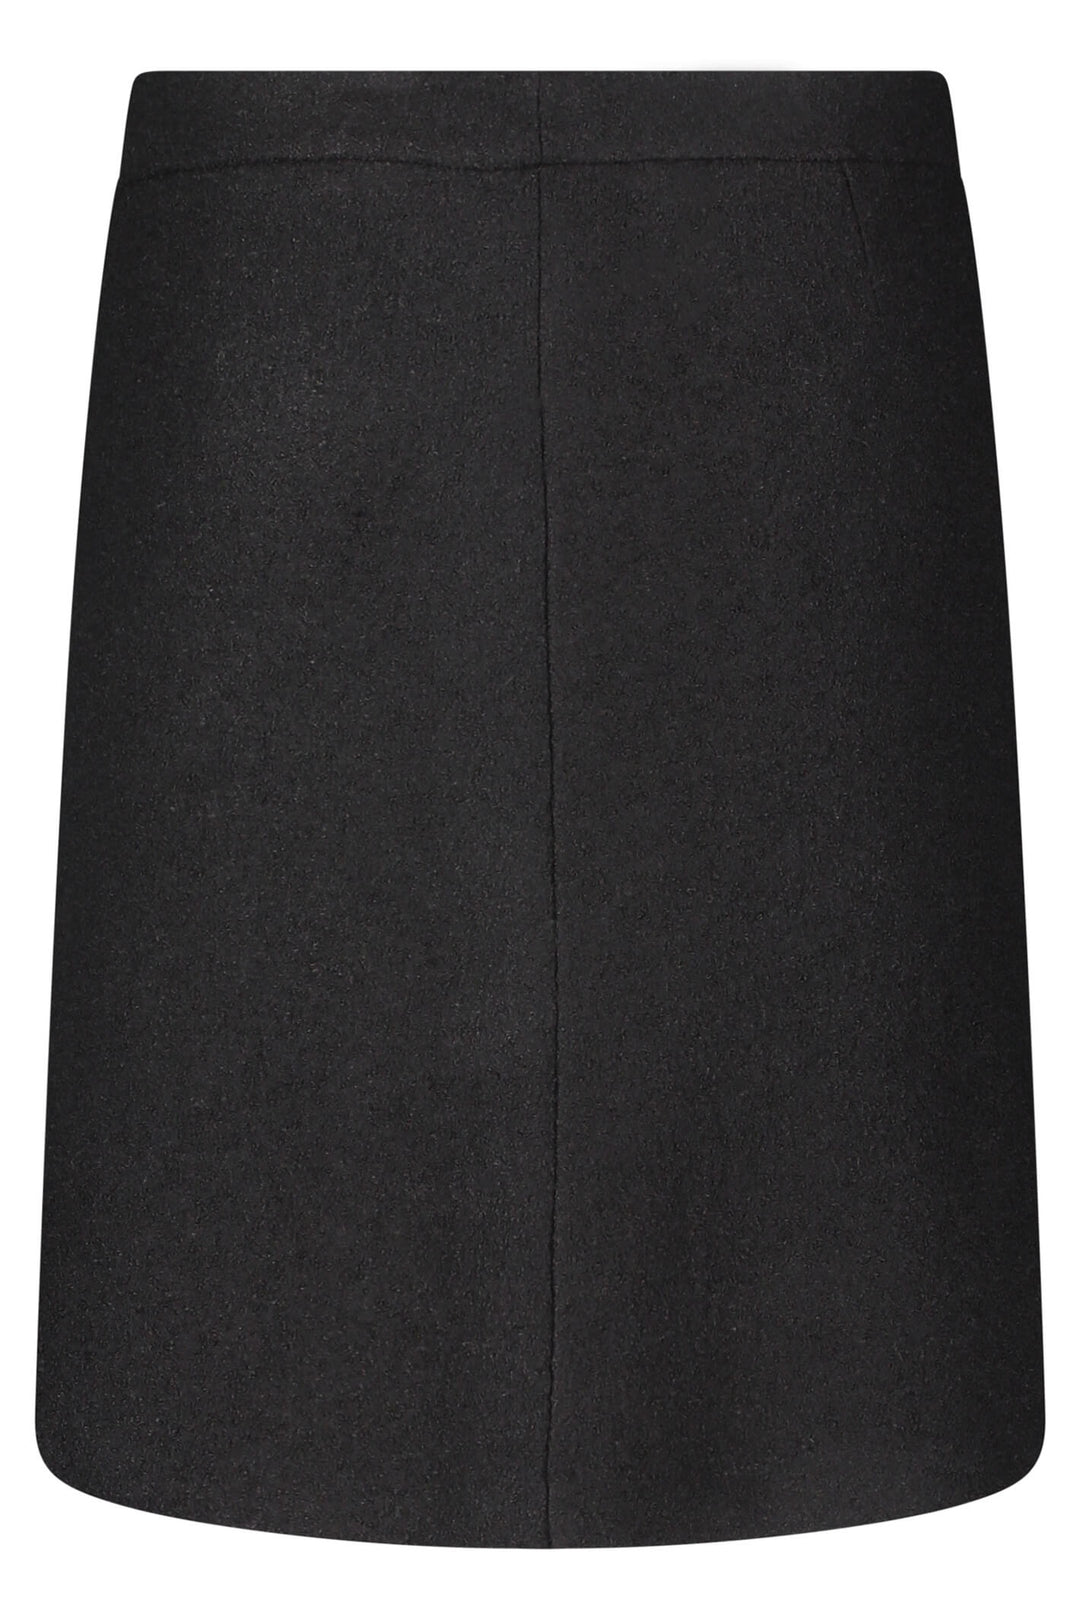 Betty Barclay 9304 1802 9045 Black Wool Mix Knee Length Skirt - Dotique Chesterfield